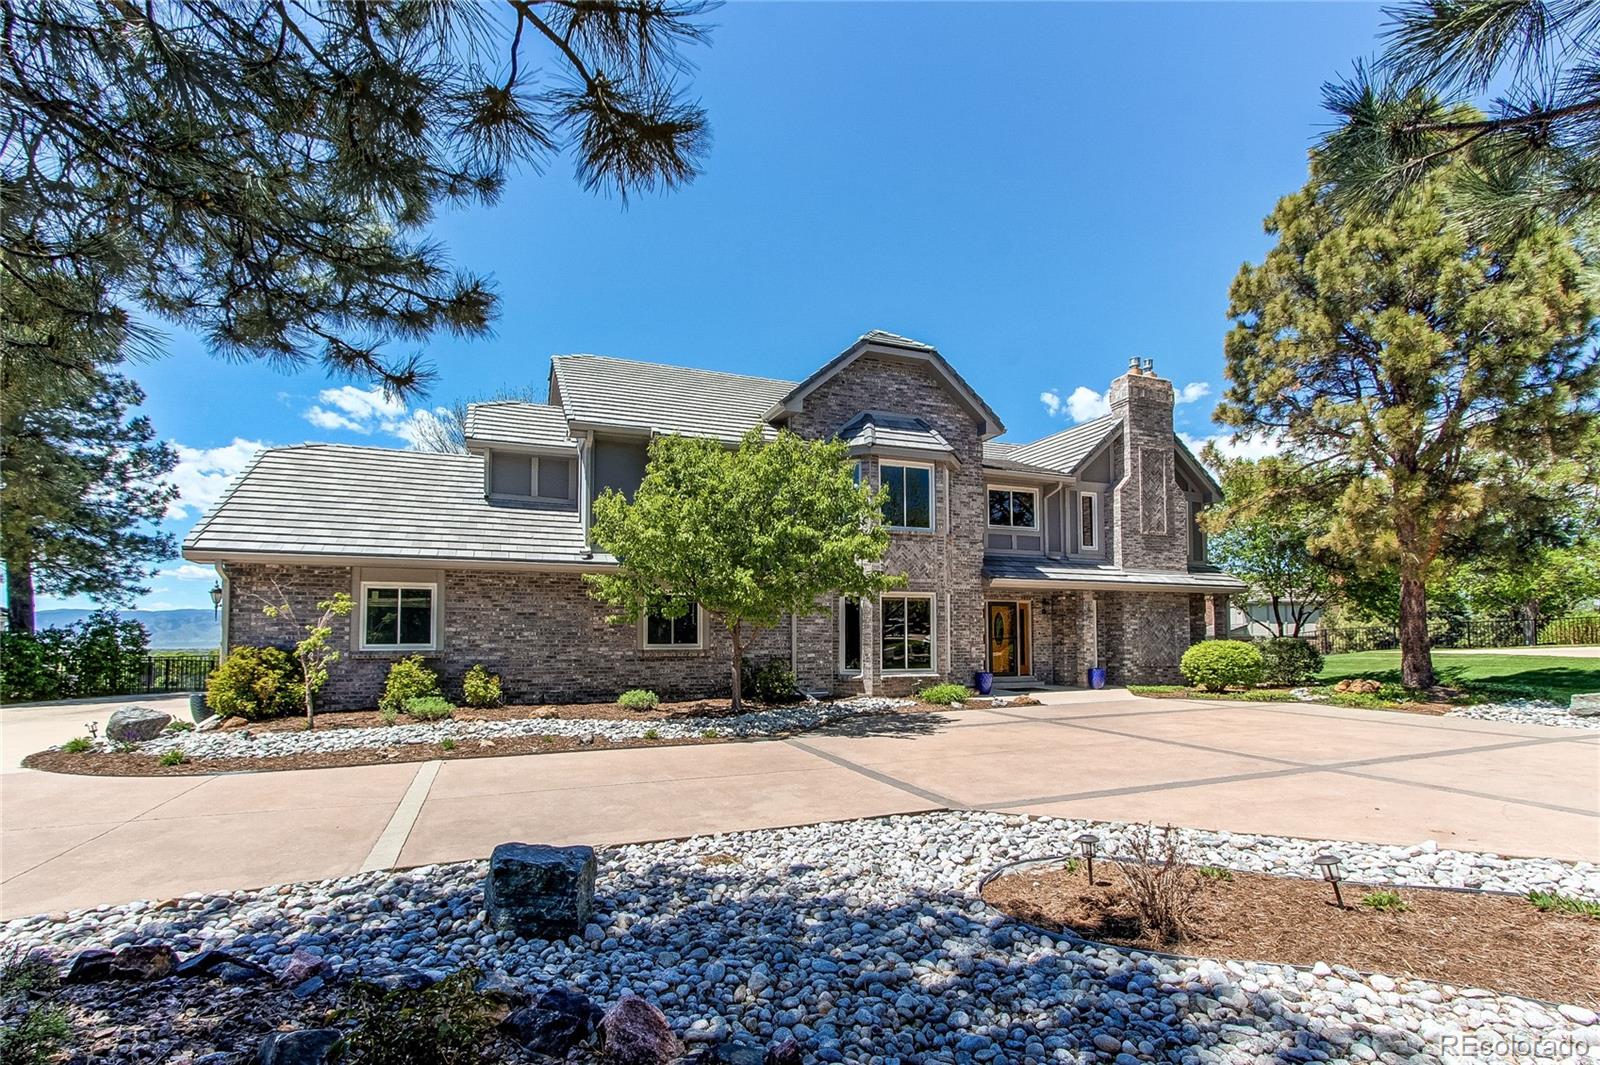 9  Falcon Hills Drive, highlands ranch MLS: 4428577 Beds: 6 Baths: 5 Price: $1,525,000